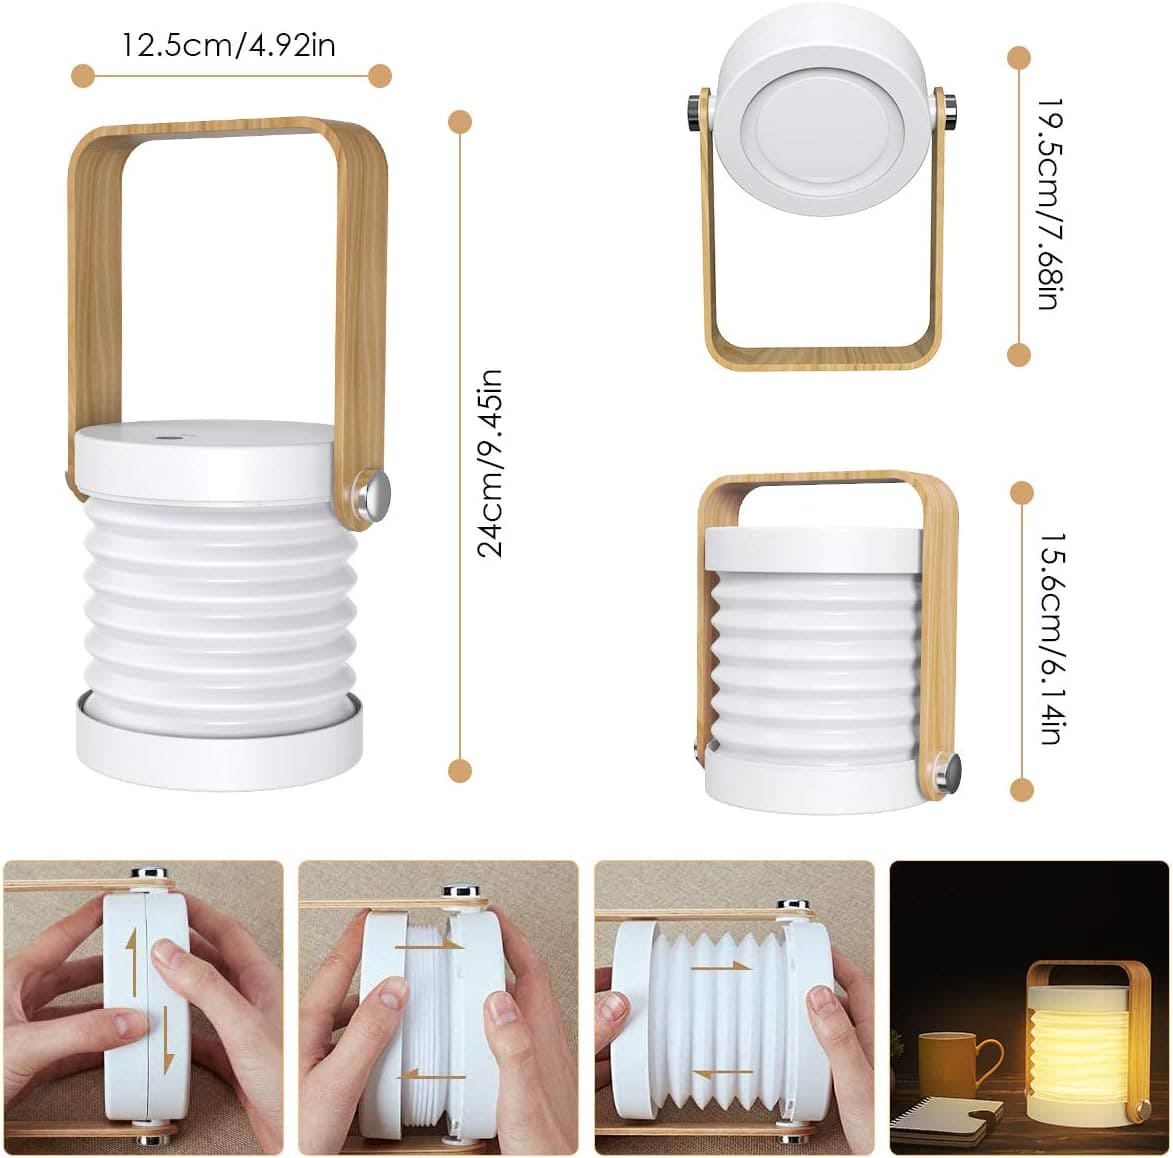 4 In 1 Foldable Table Lamp, Touch Dimmable LED Portable Lantern Light, Rechargeable Camping Lantern Night Light, Wooden Handle Telescopic Lantern Light, Touch Control Dimmable 3 Level Night Light